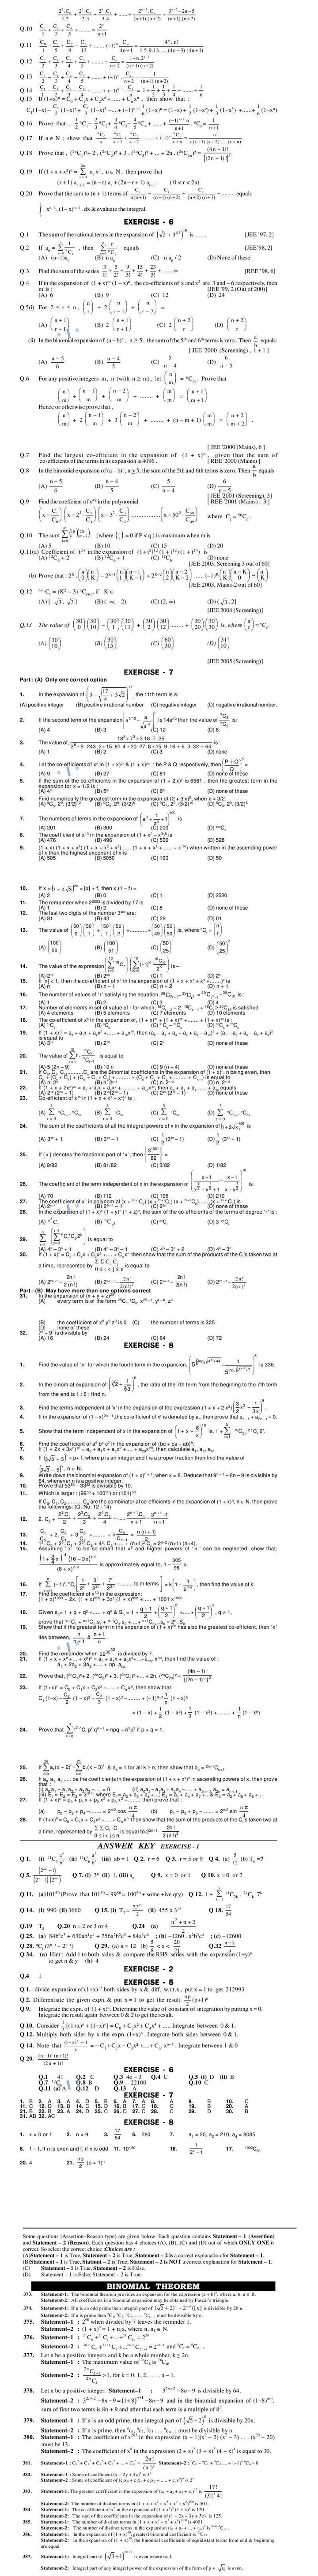 Maths Study Material - Chapter 21